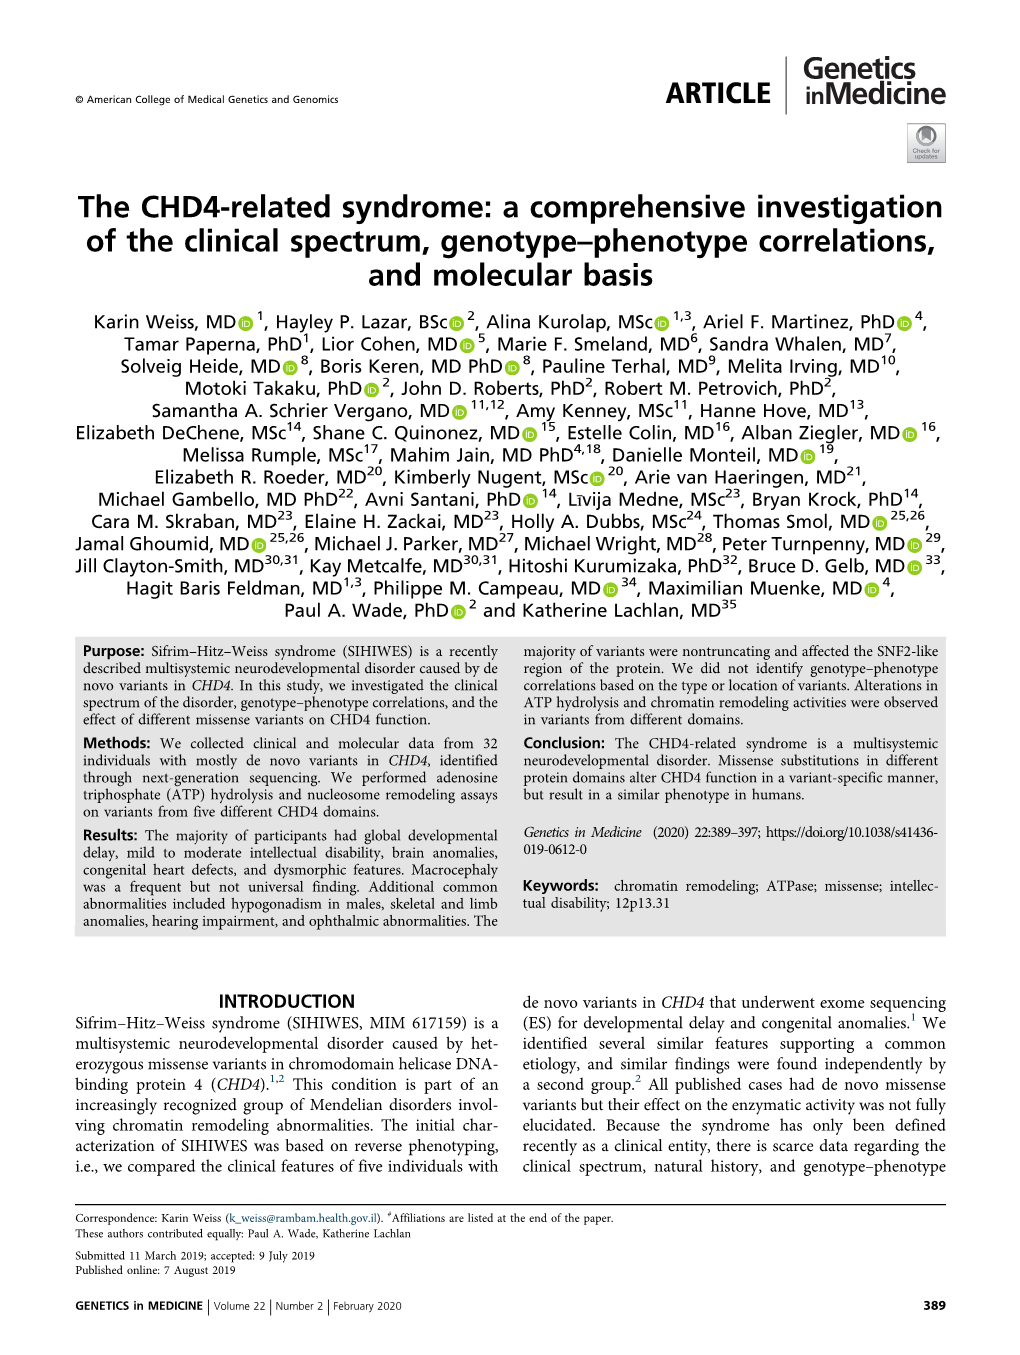 The CHD4-Related Syndrome: a Comprehensive Investigation of the Clinical Spectrum, Genotype–Phenotype Correlations, and Molecular Basis